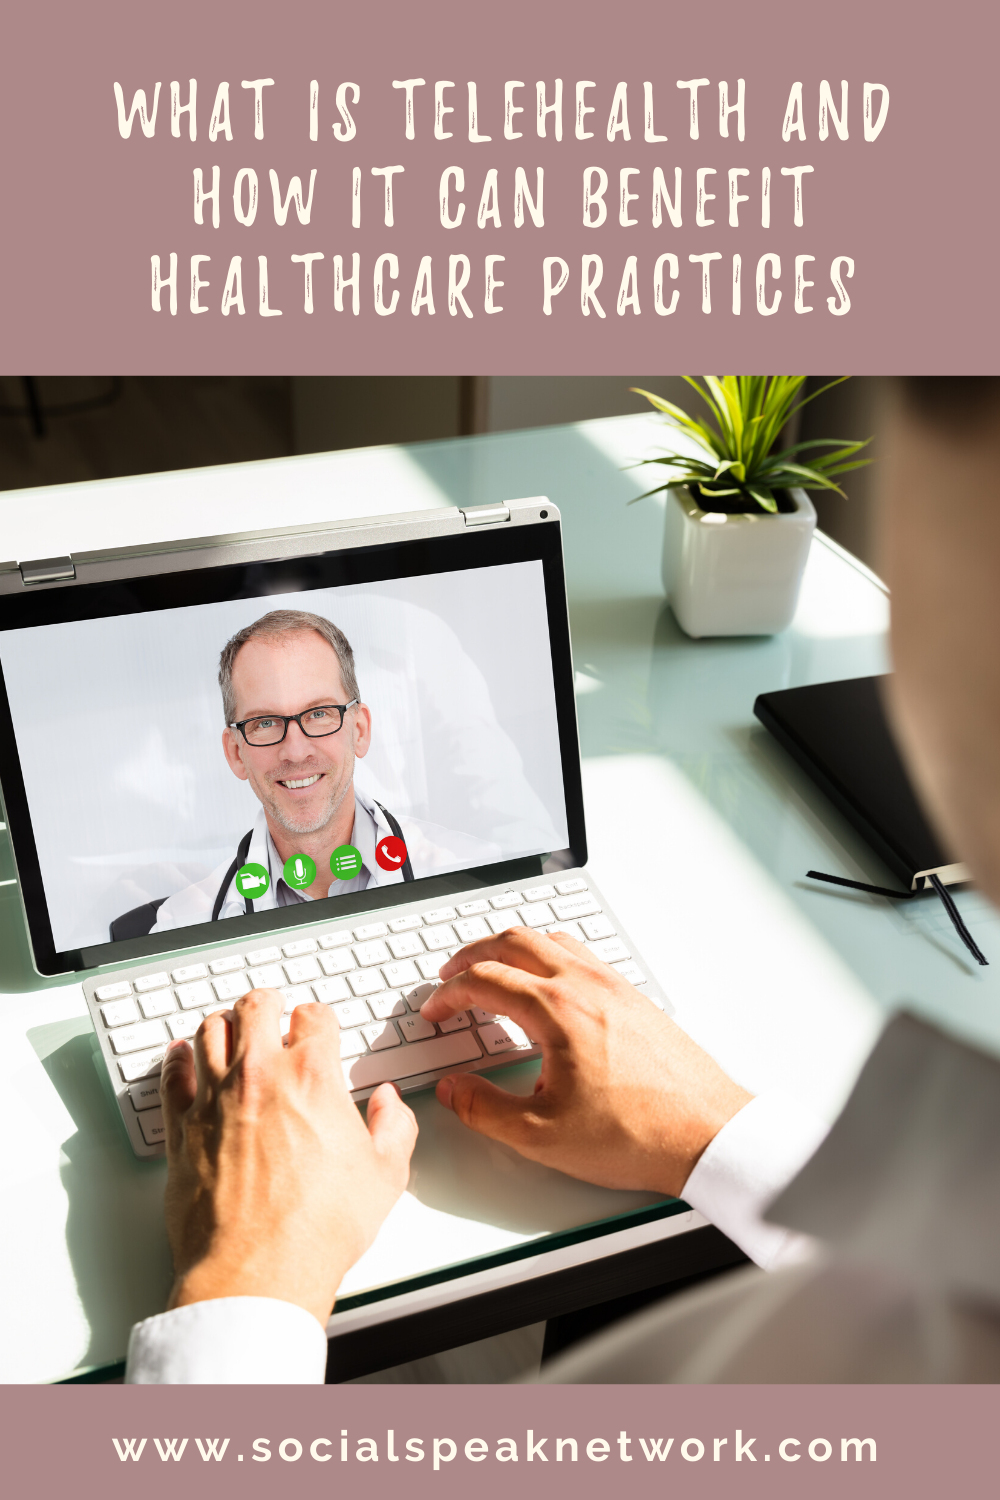 What is Telehealth and How It Can Benefit Healthcare Practices